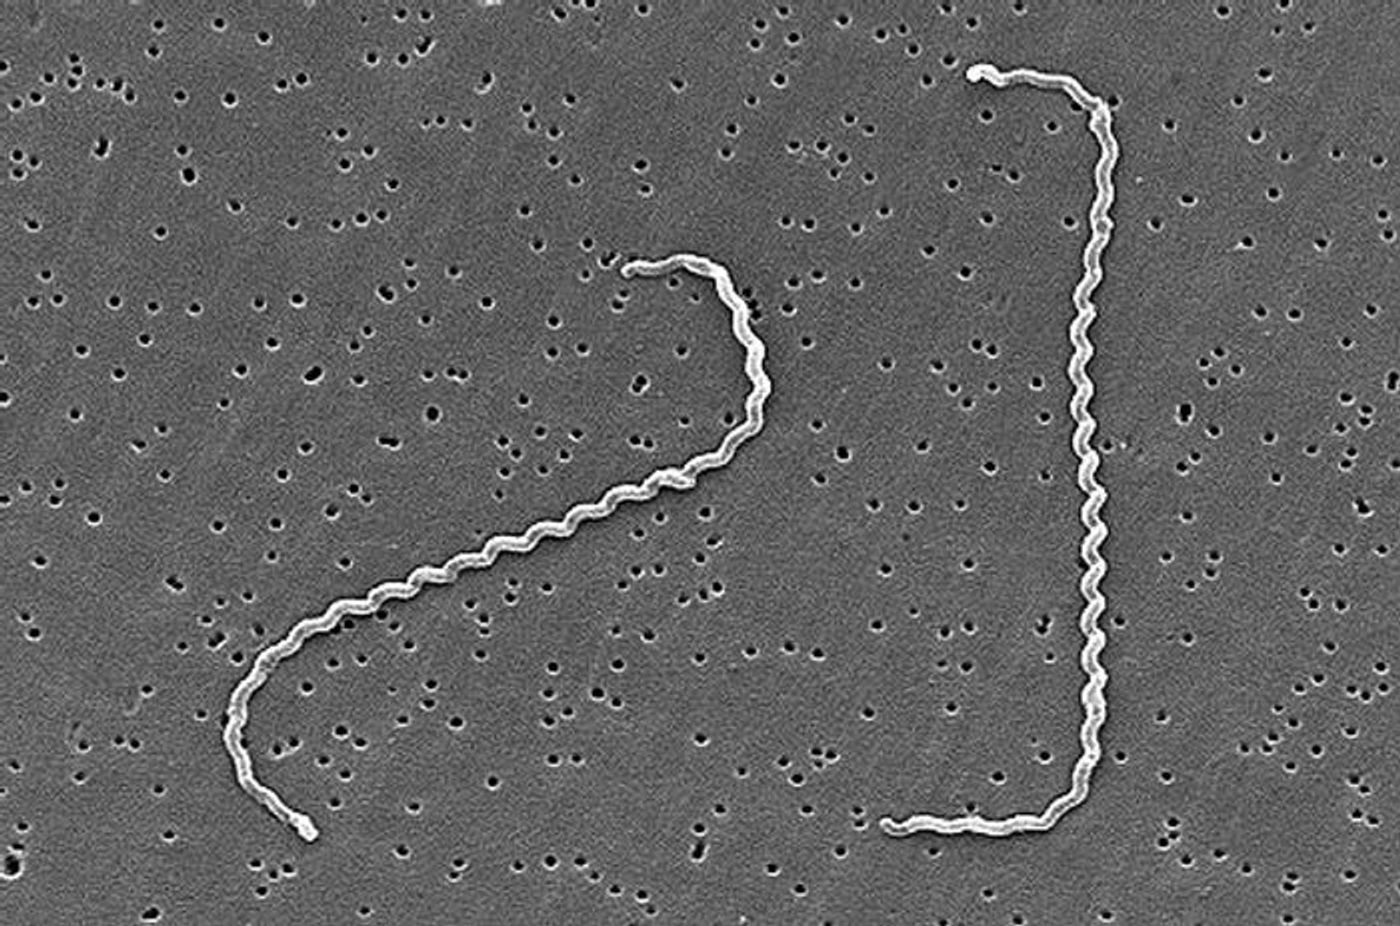 An SEM image revealing some of the ultrastructural features of two, spiral-shaped, Leptospira interrogans bacteria bound to a 0.2 µm filter. / Credit: CDC/ Rob Weyant